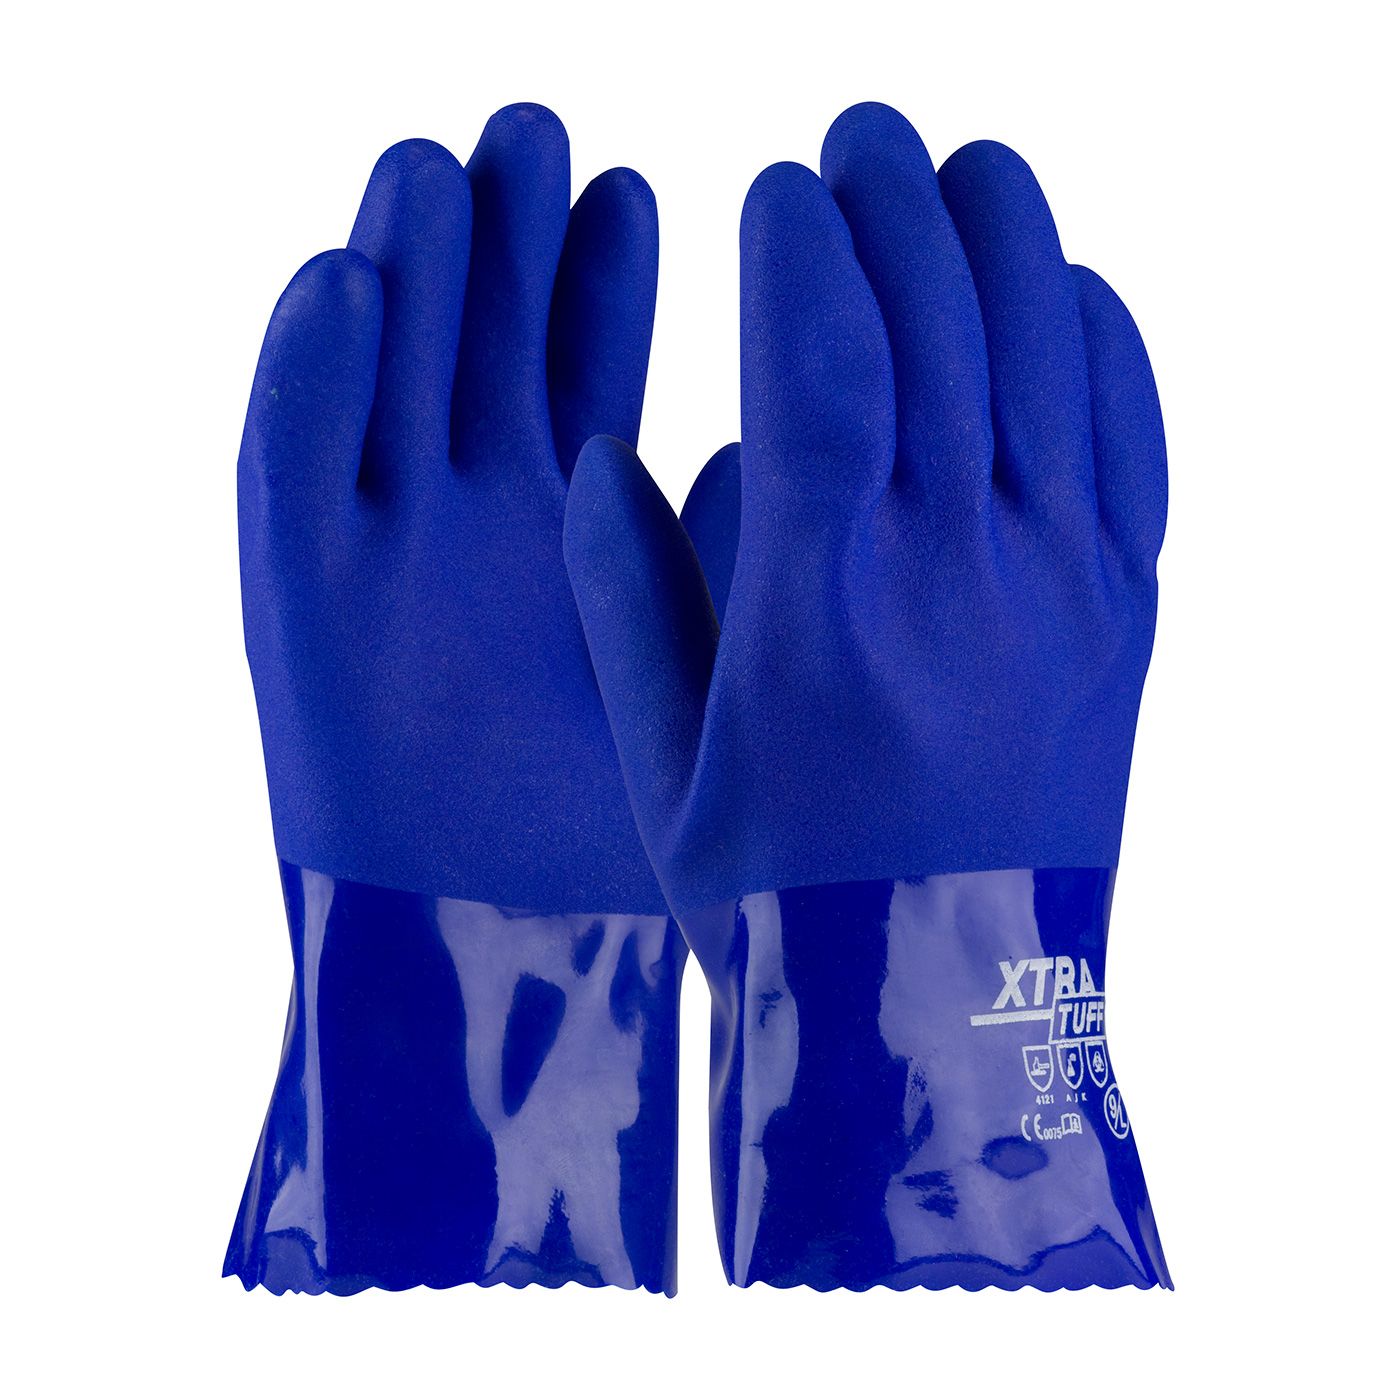 XtraTuff™ Oil Resistant PVC Coated Glove with Seamless Liner and Rough Finish